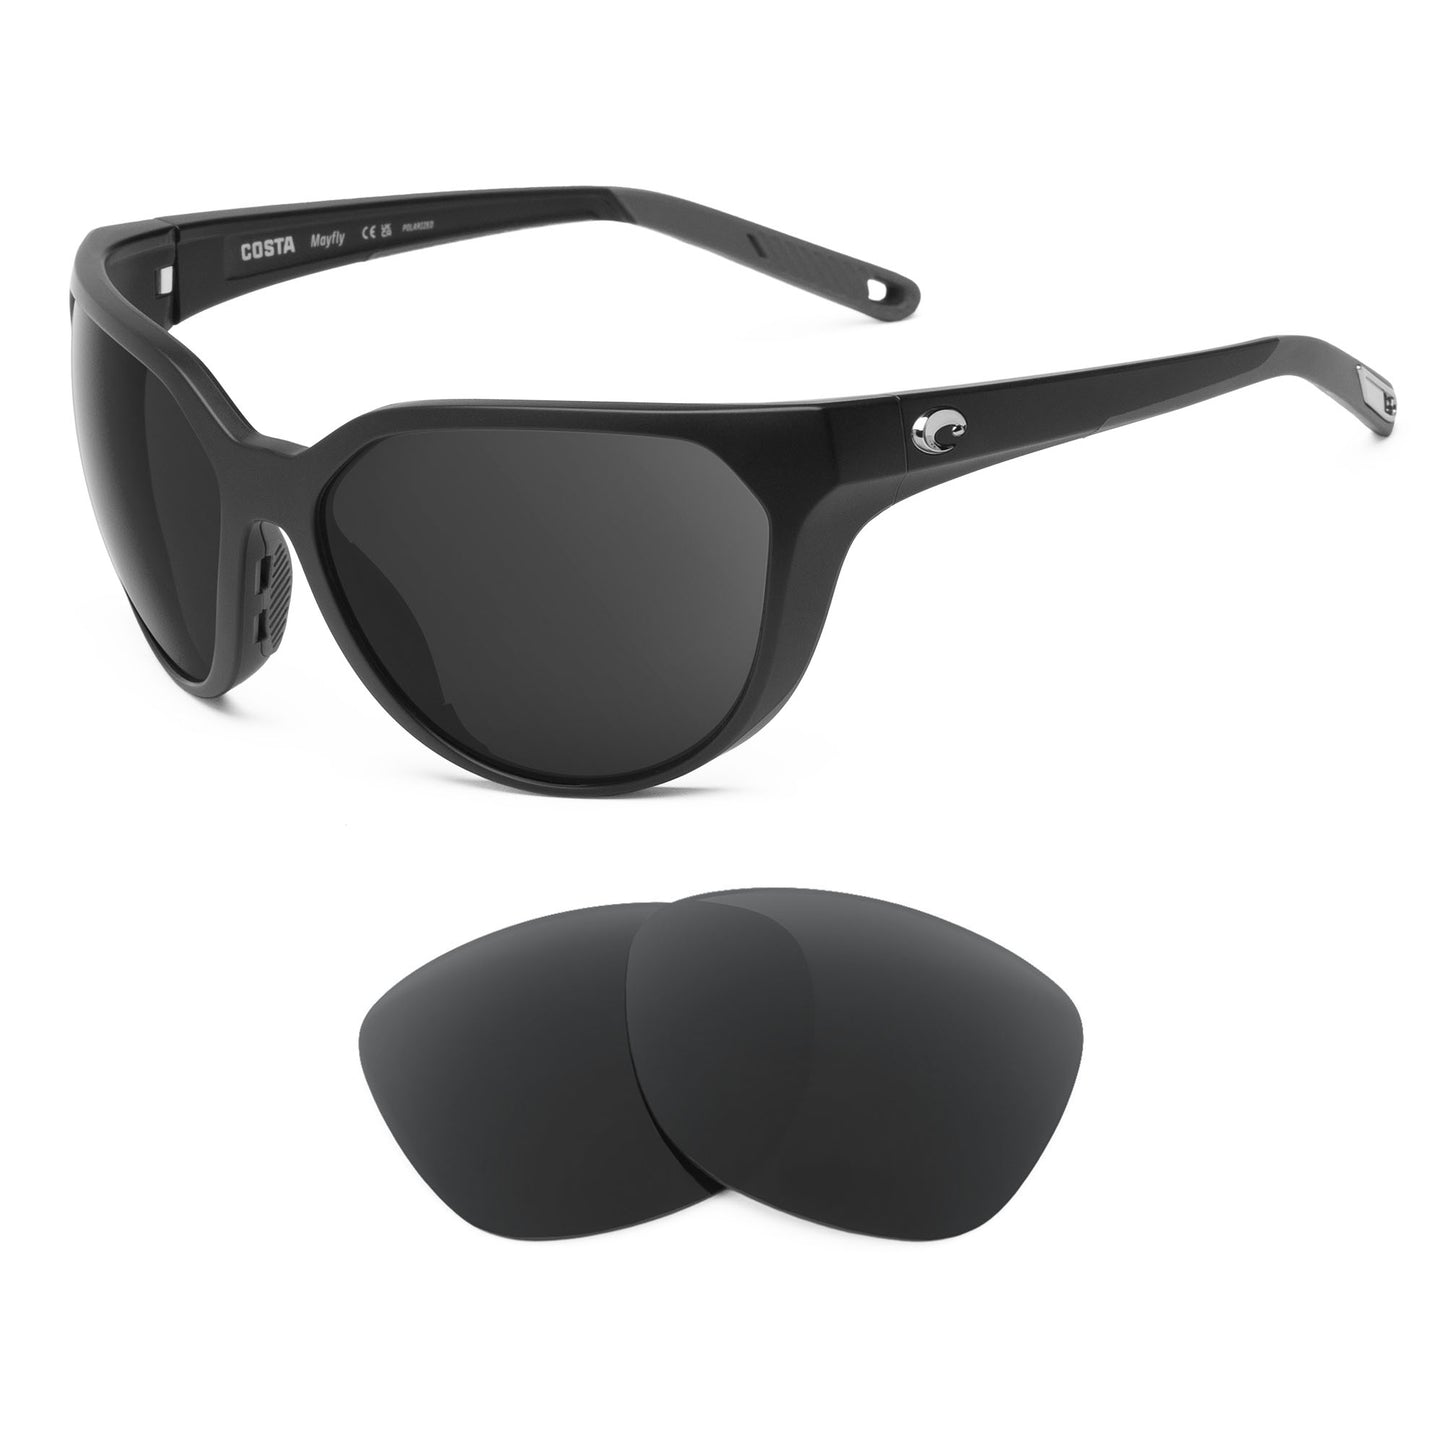 Costa Mayfly sunglasses with replacement lenses